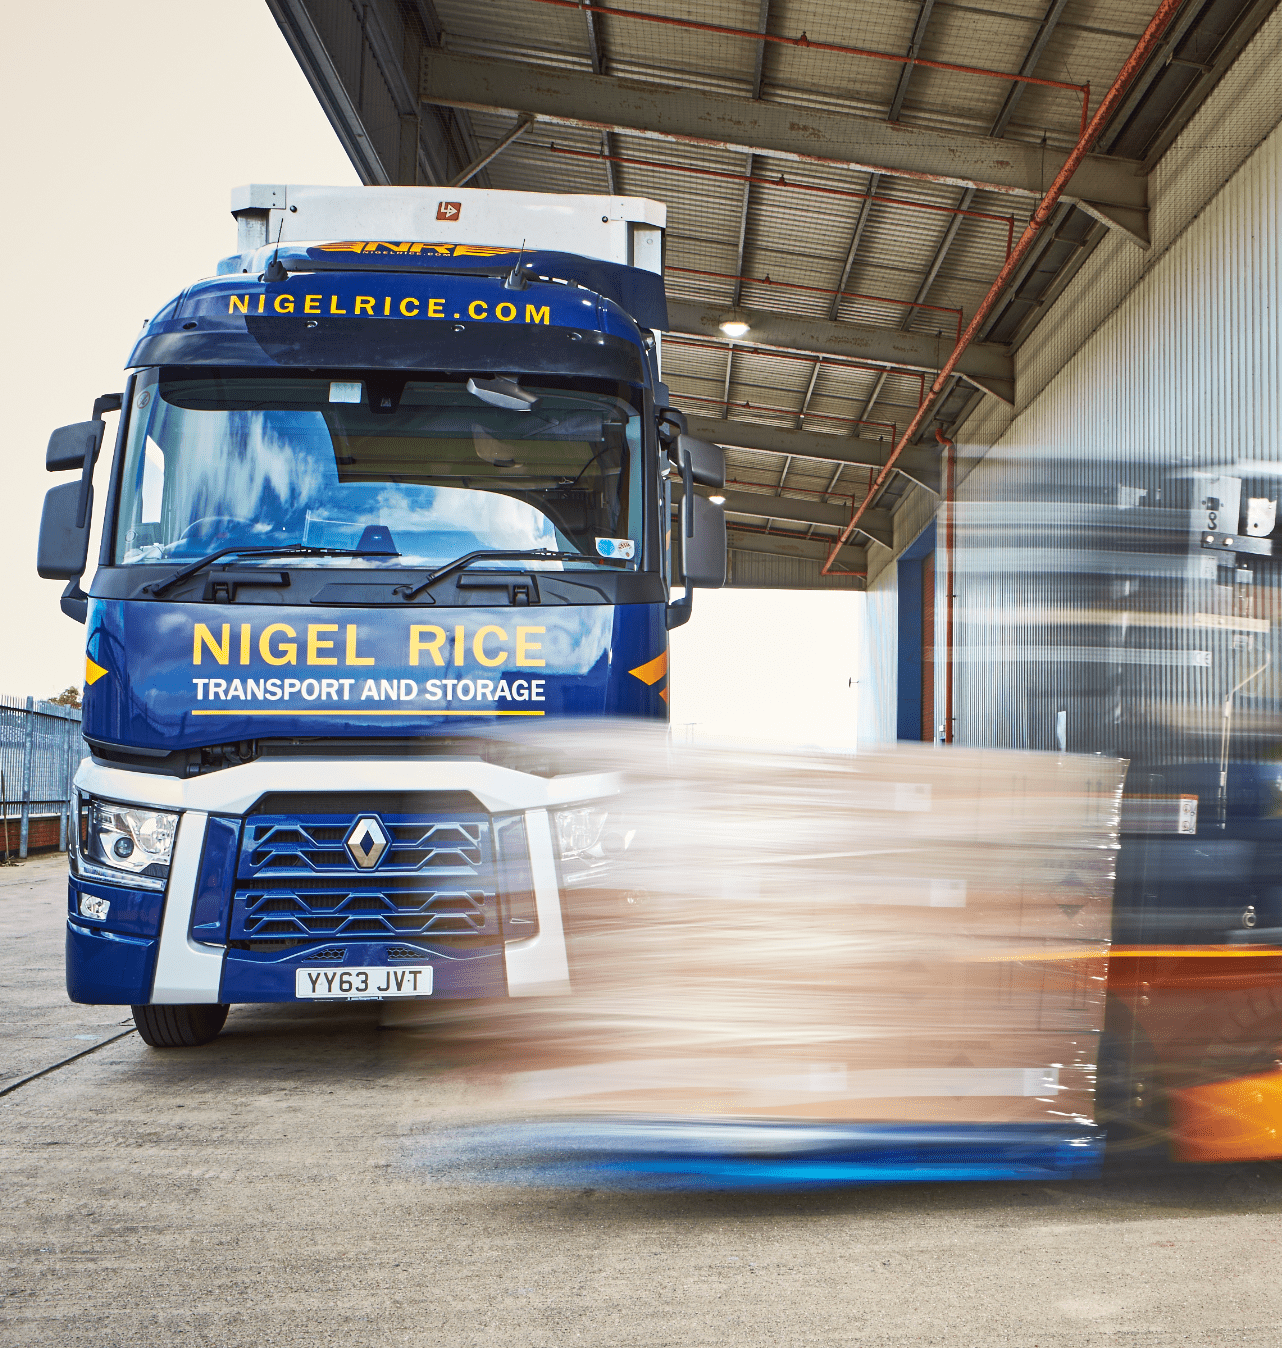 Nigel Rice Transport and Storage, Haulage Company in Hull